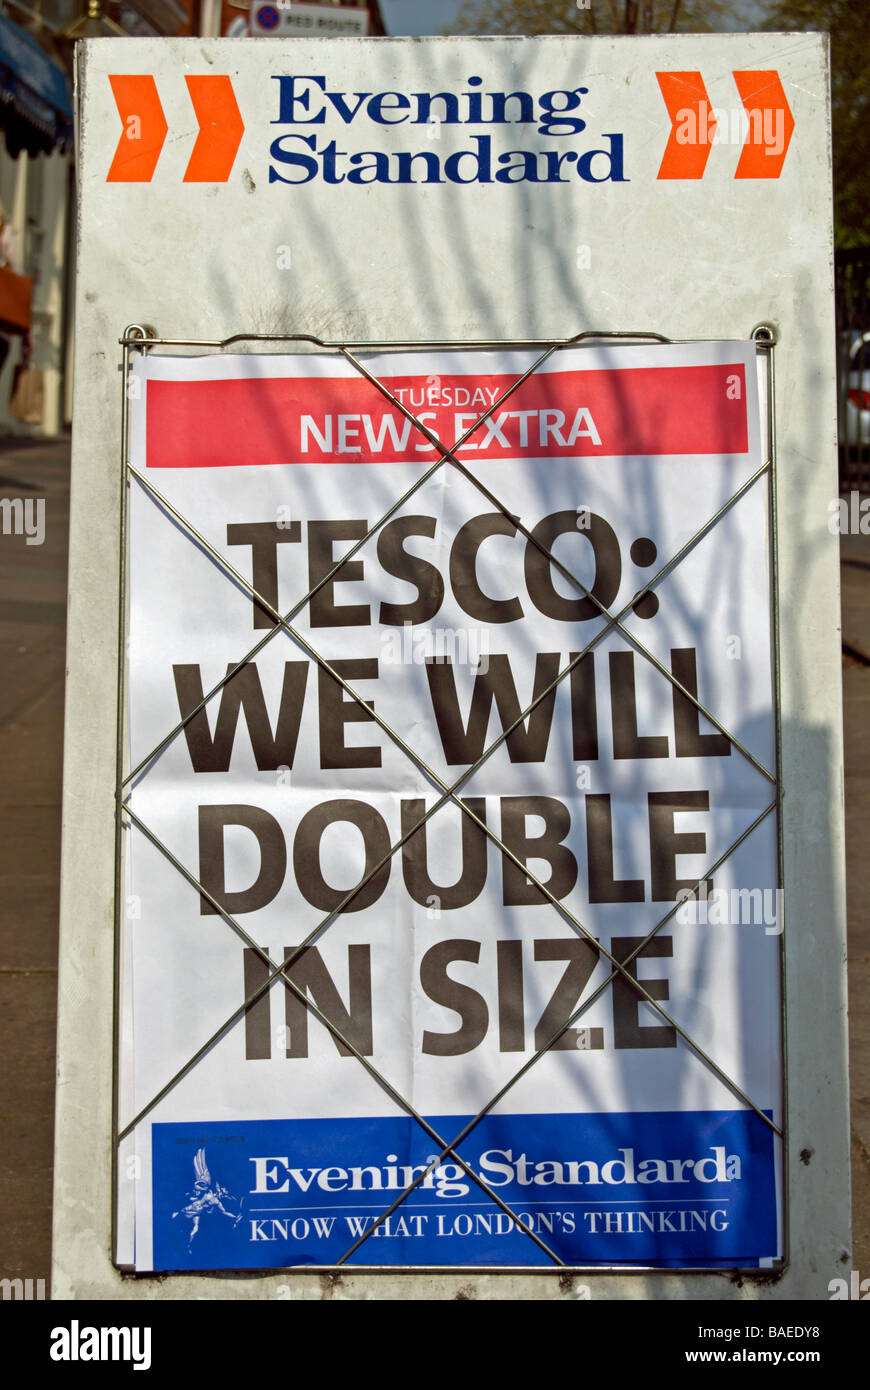 tesco will double in size, announced on a street stand for london's evening standard newspaper Stock Photo